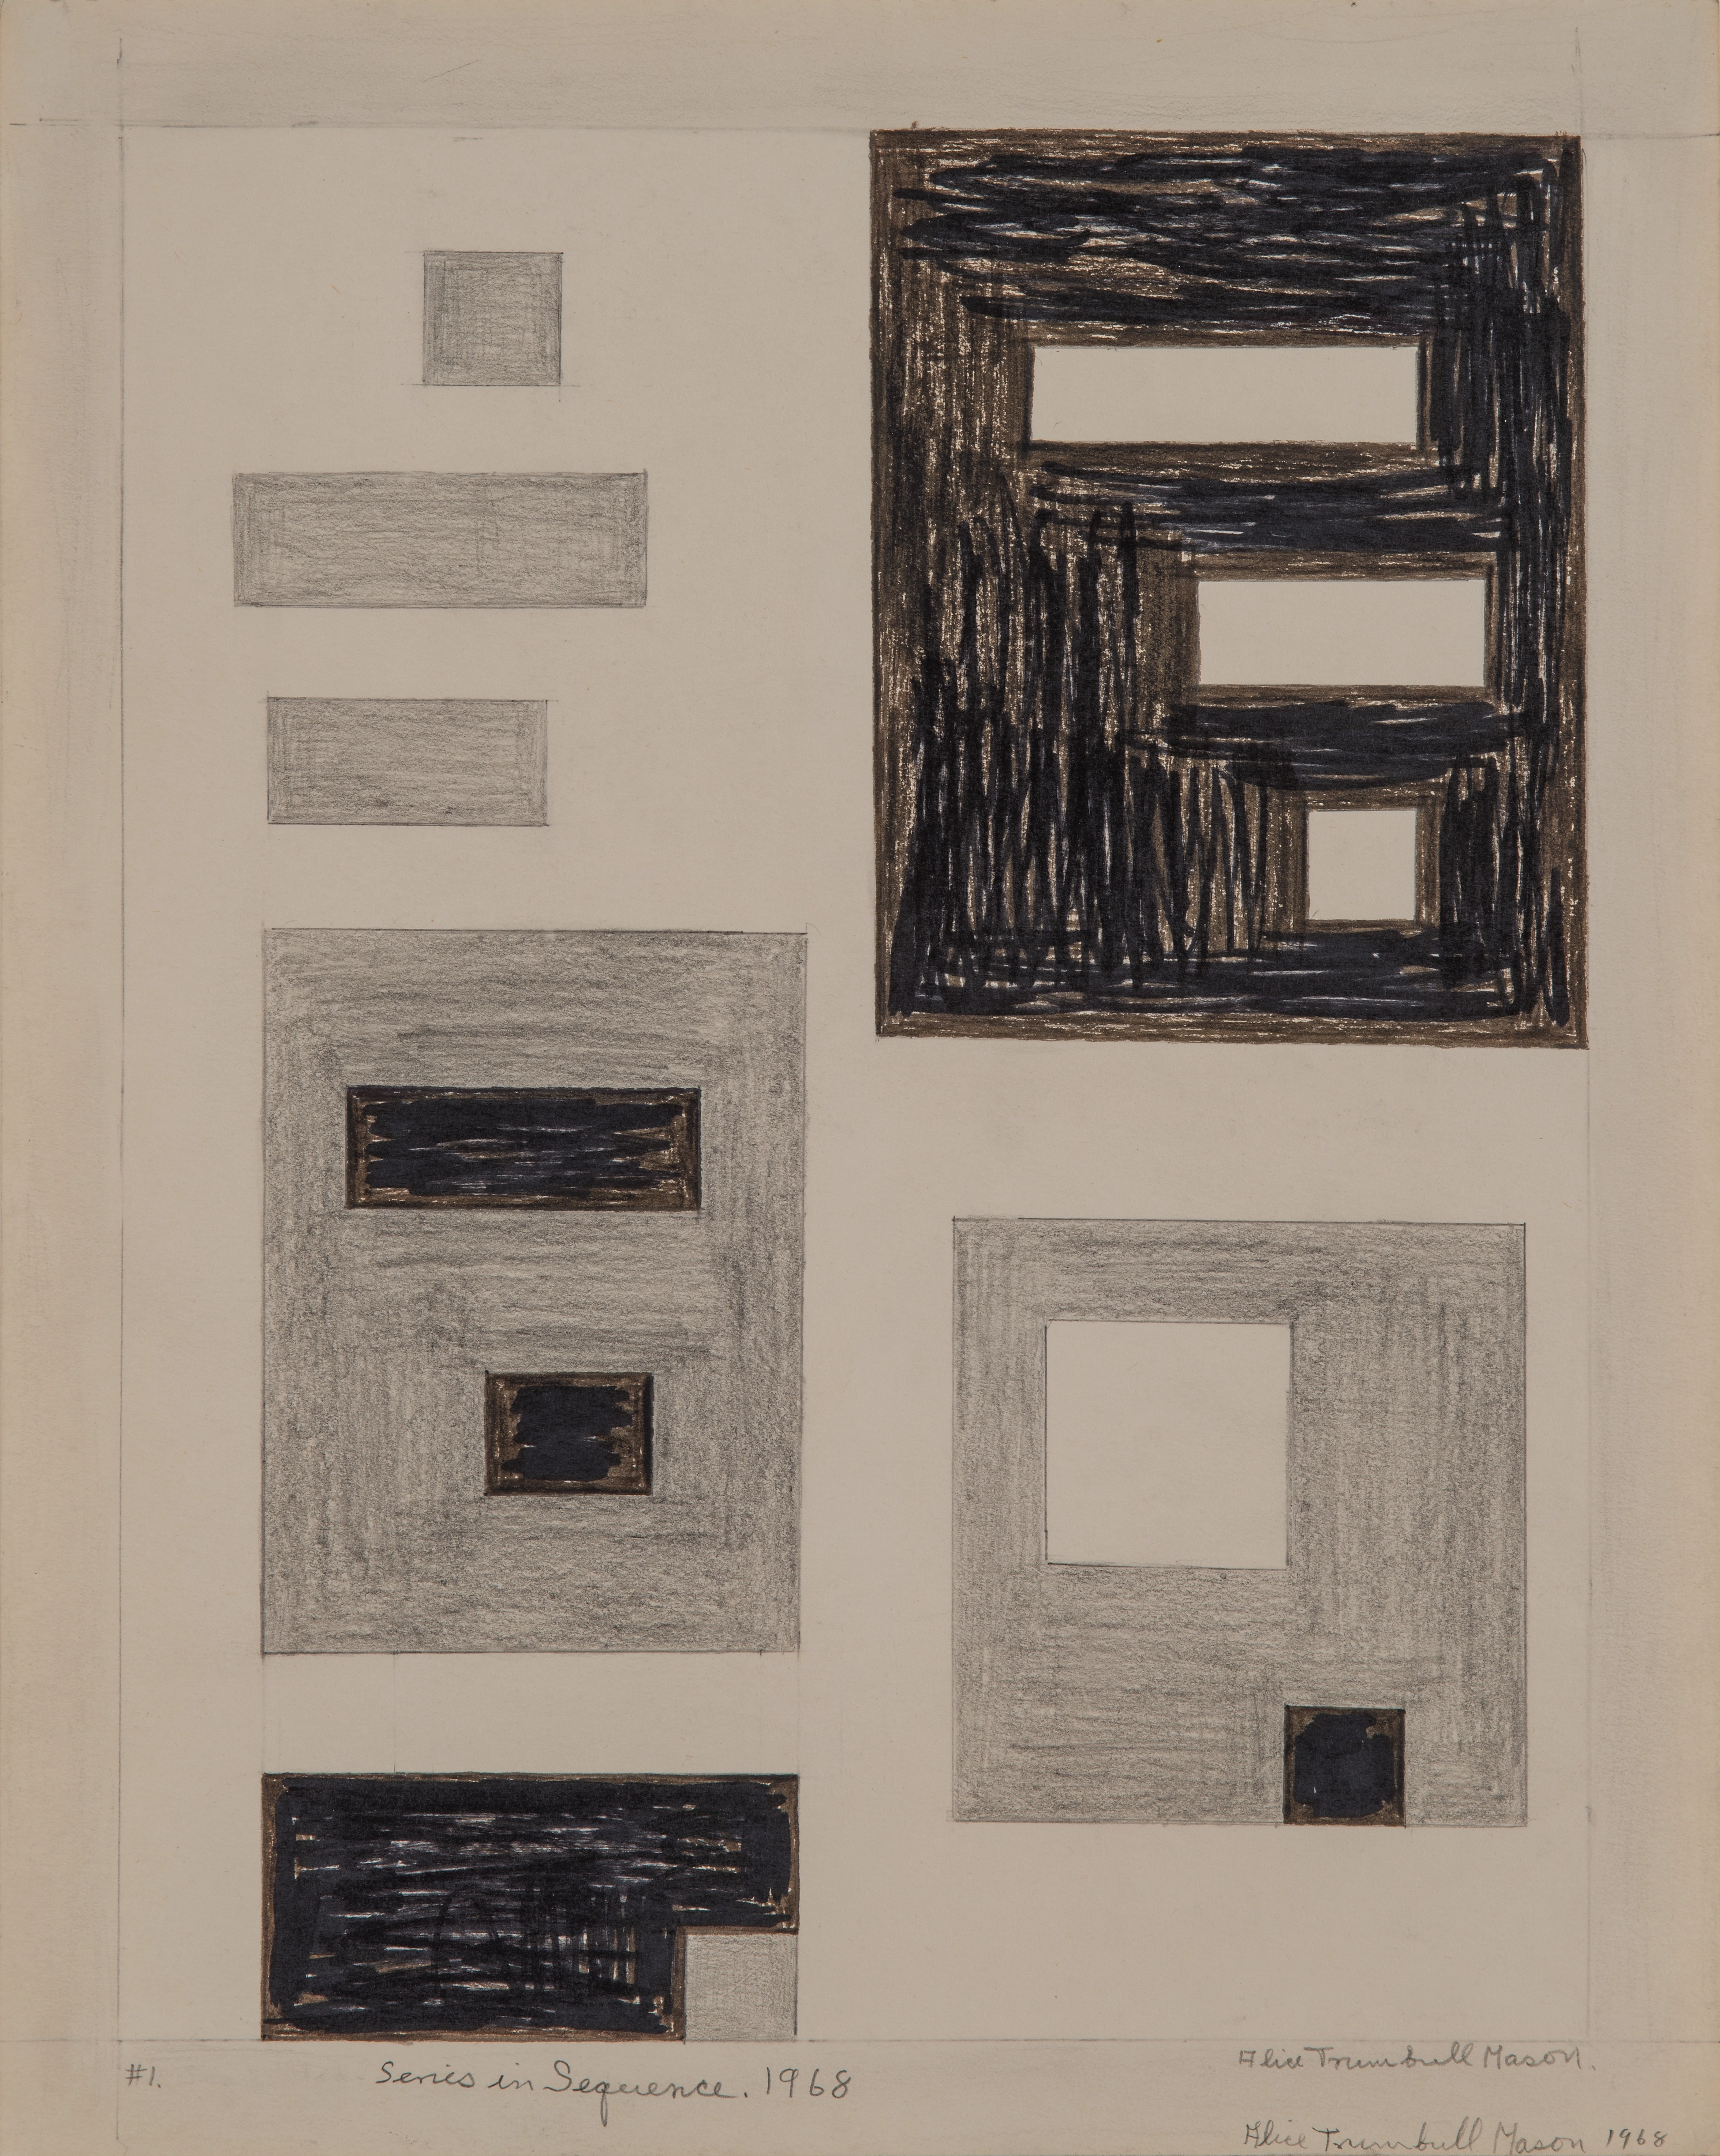 Abstract drawing with graphite on paper, comprised of black, grey, and white squares and rectangles.